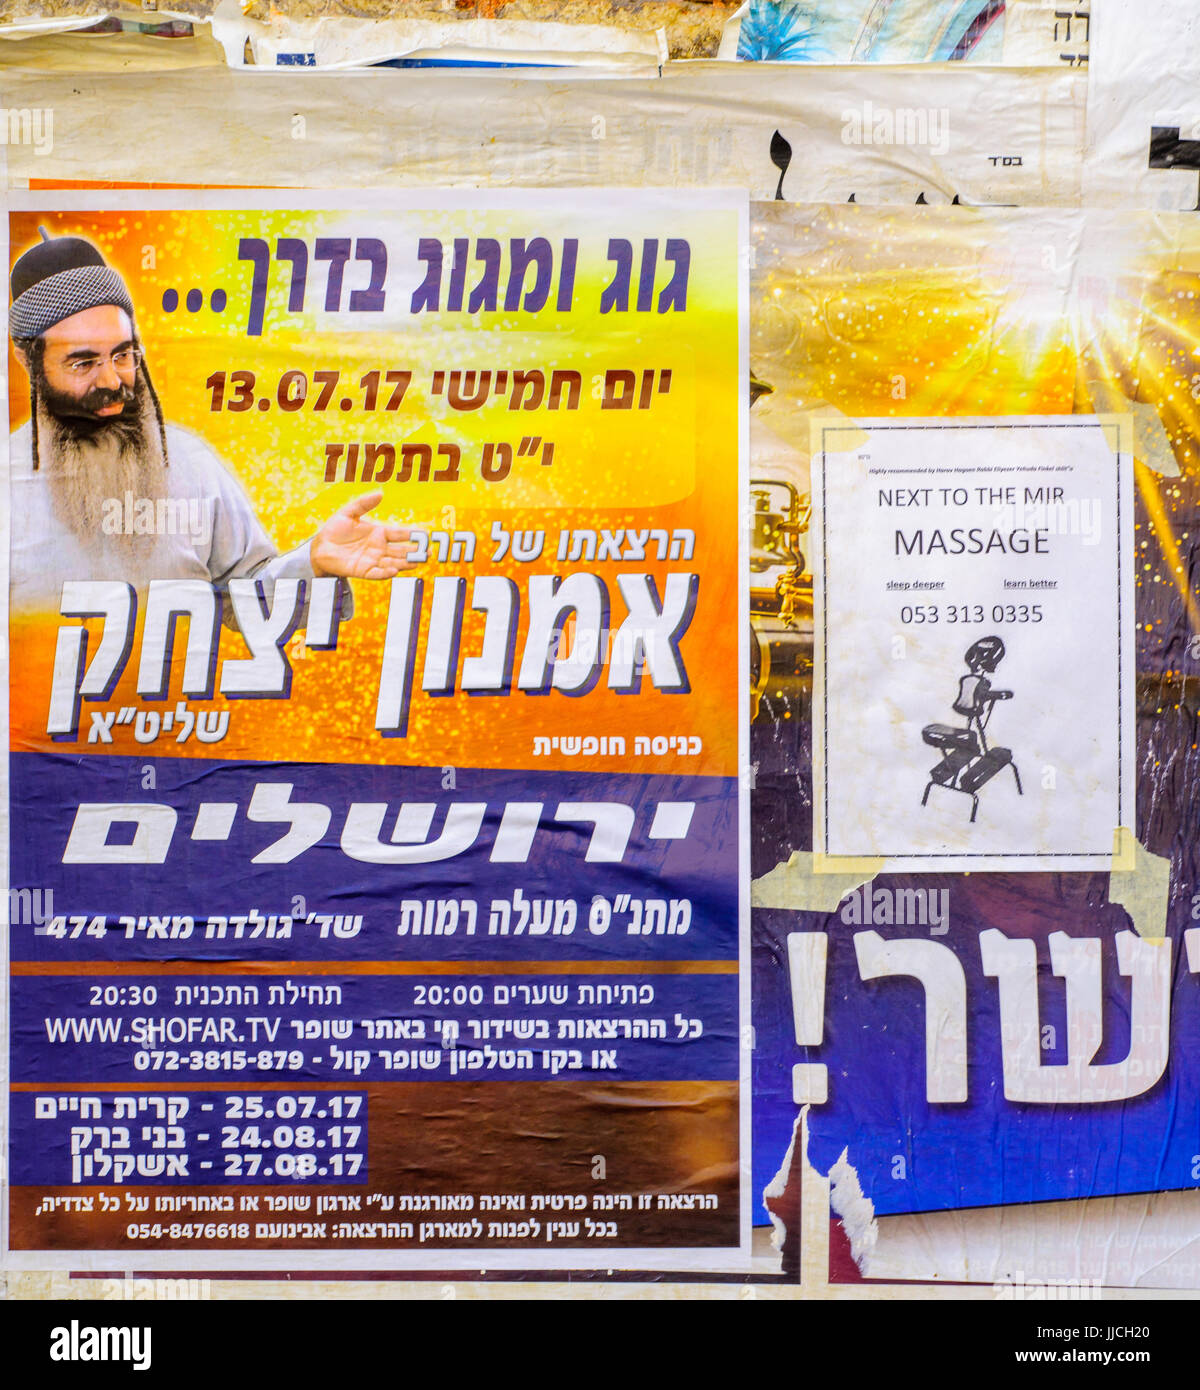 JERUSALEM, ISRAEL - JULY 12, 2017: Combination of posters about religious preaching, and massages, in the ultra-orthodox neighborhood Mea Shearim, Jer Stock Photo